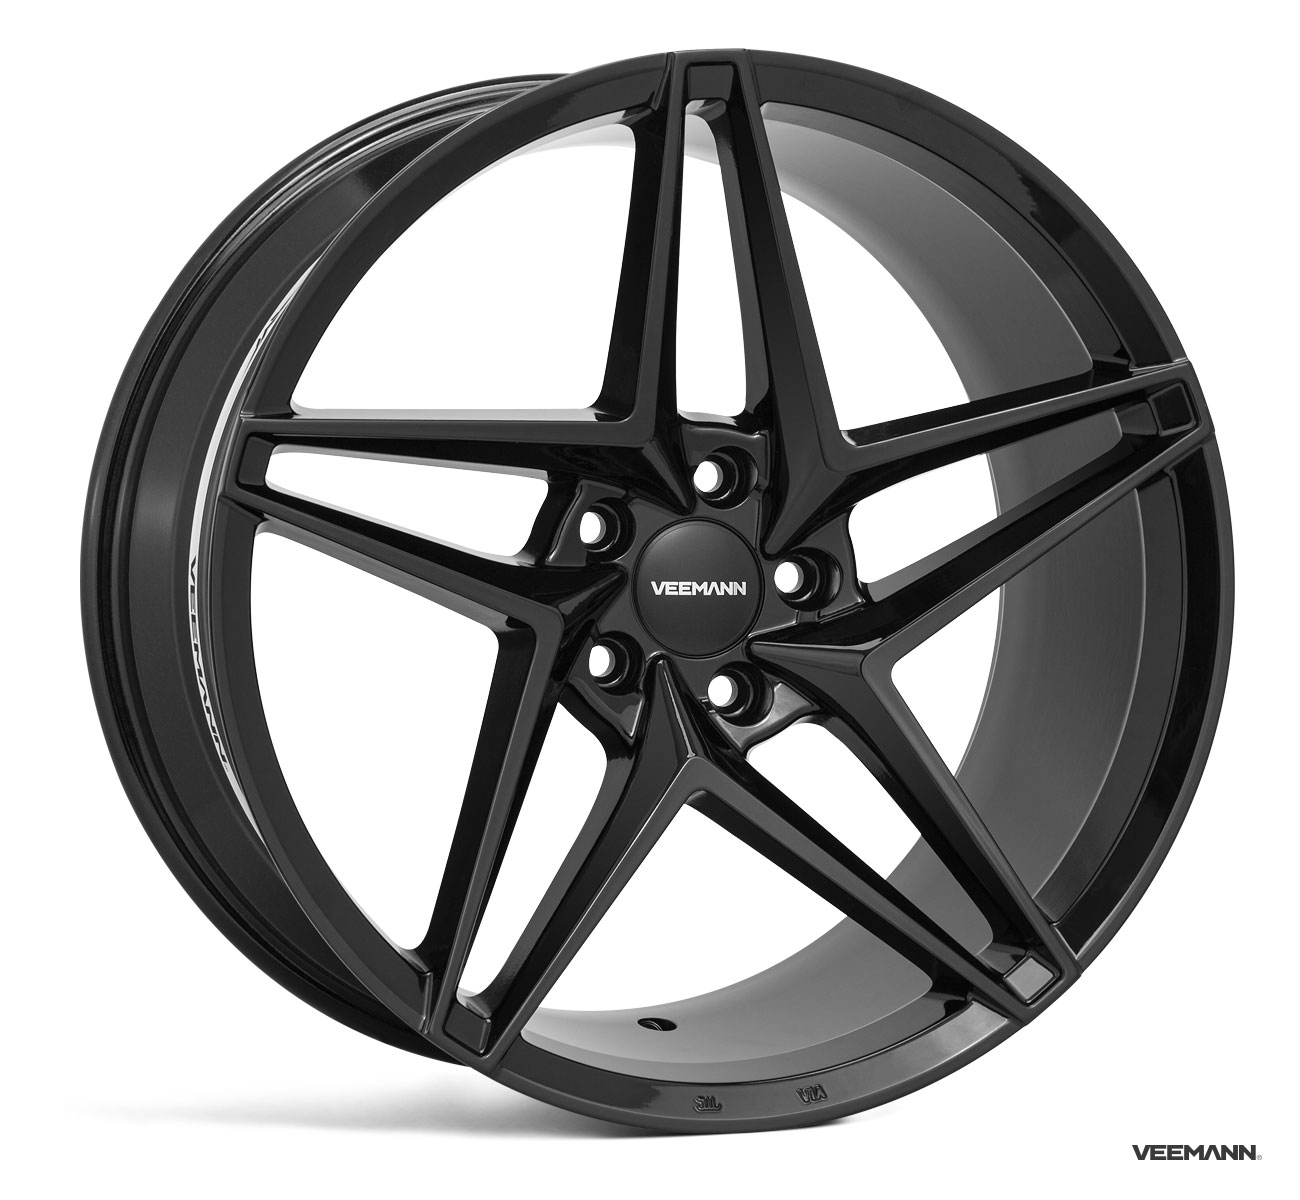 NEW 20" VEEMANN V-FS46 ALLOY WHEELS IN GLOSS BLACK WITH WIDER 10" REARS